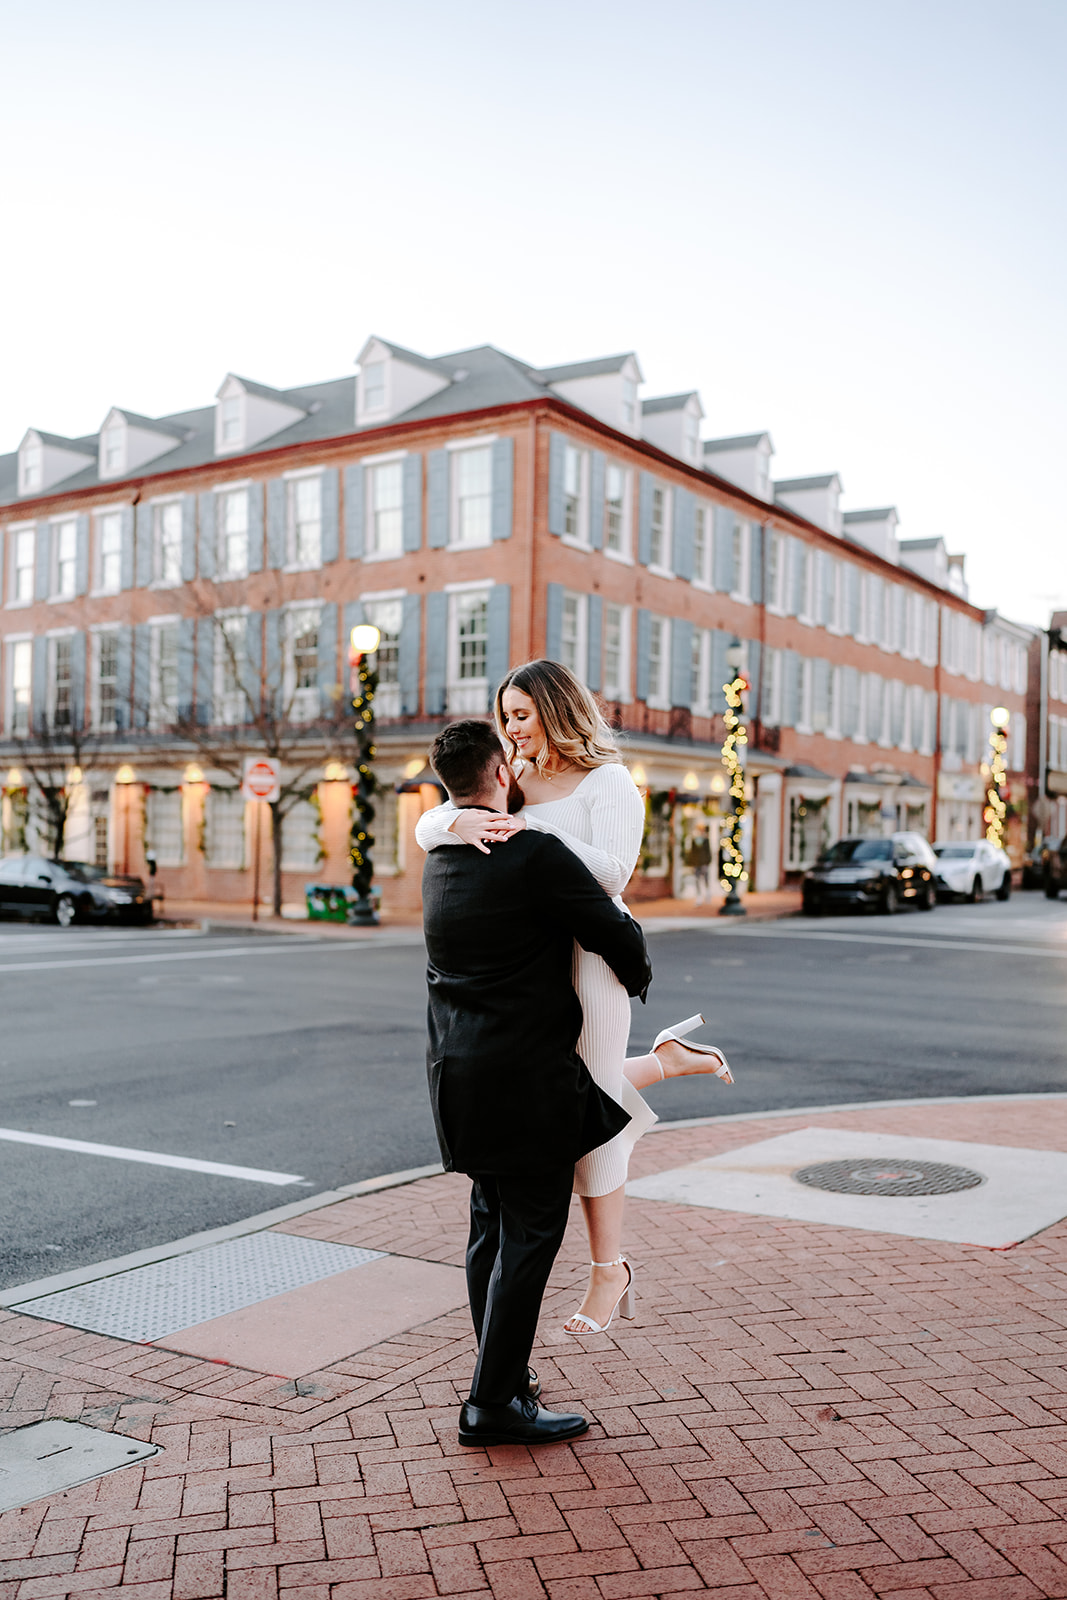 Downtown West Chester Engagement Session Maryland Wedding Photographer